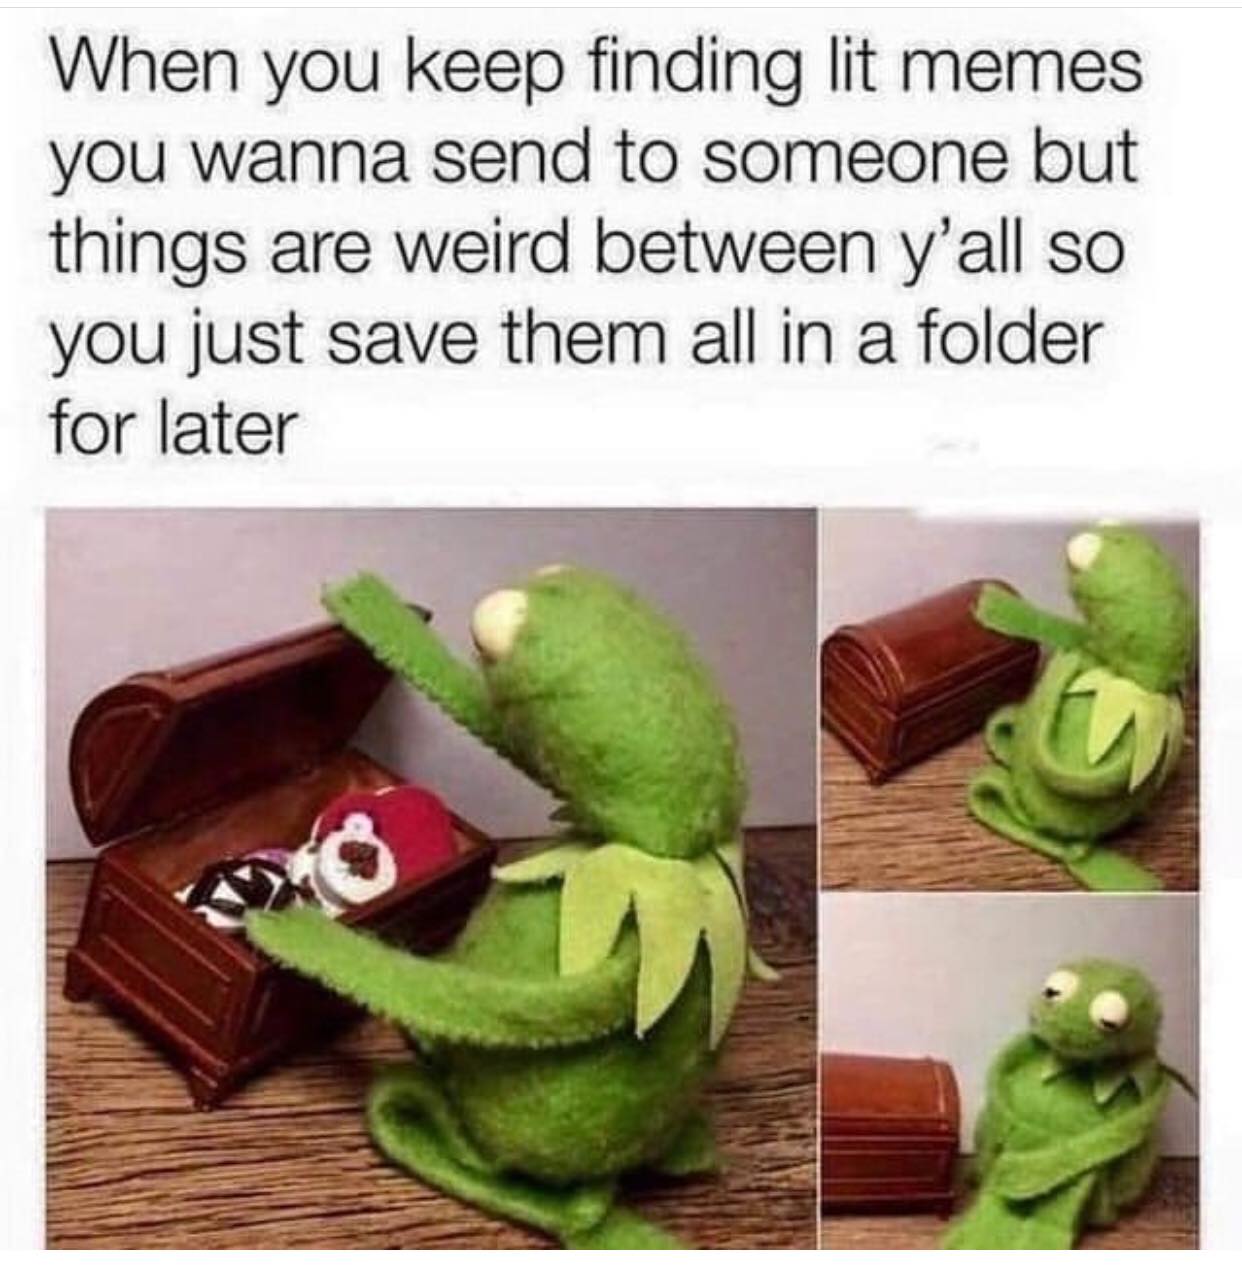 kermit the frog memes - When you keep finding lit memes you wanna send to someone but things are weird between y'all so you just save them all in a folder for later